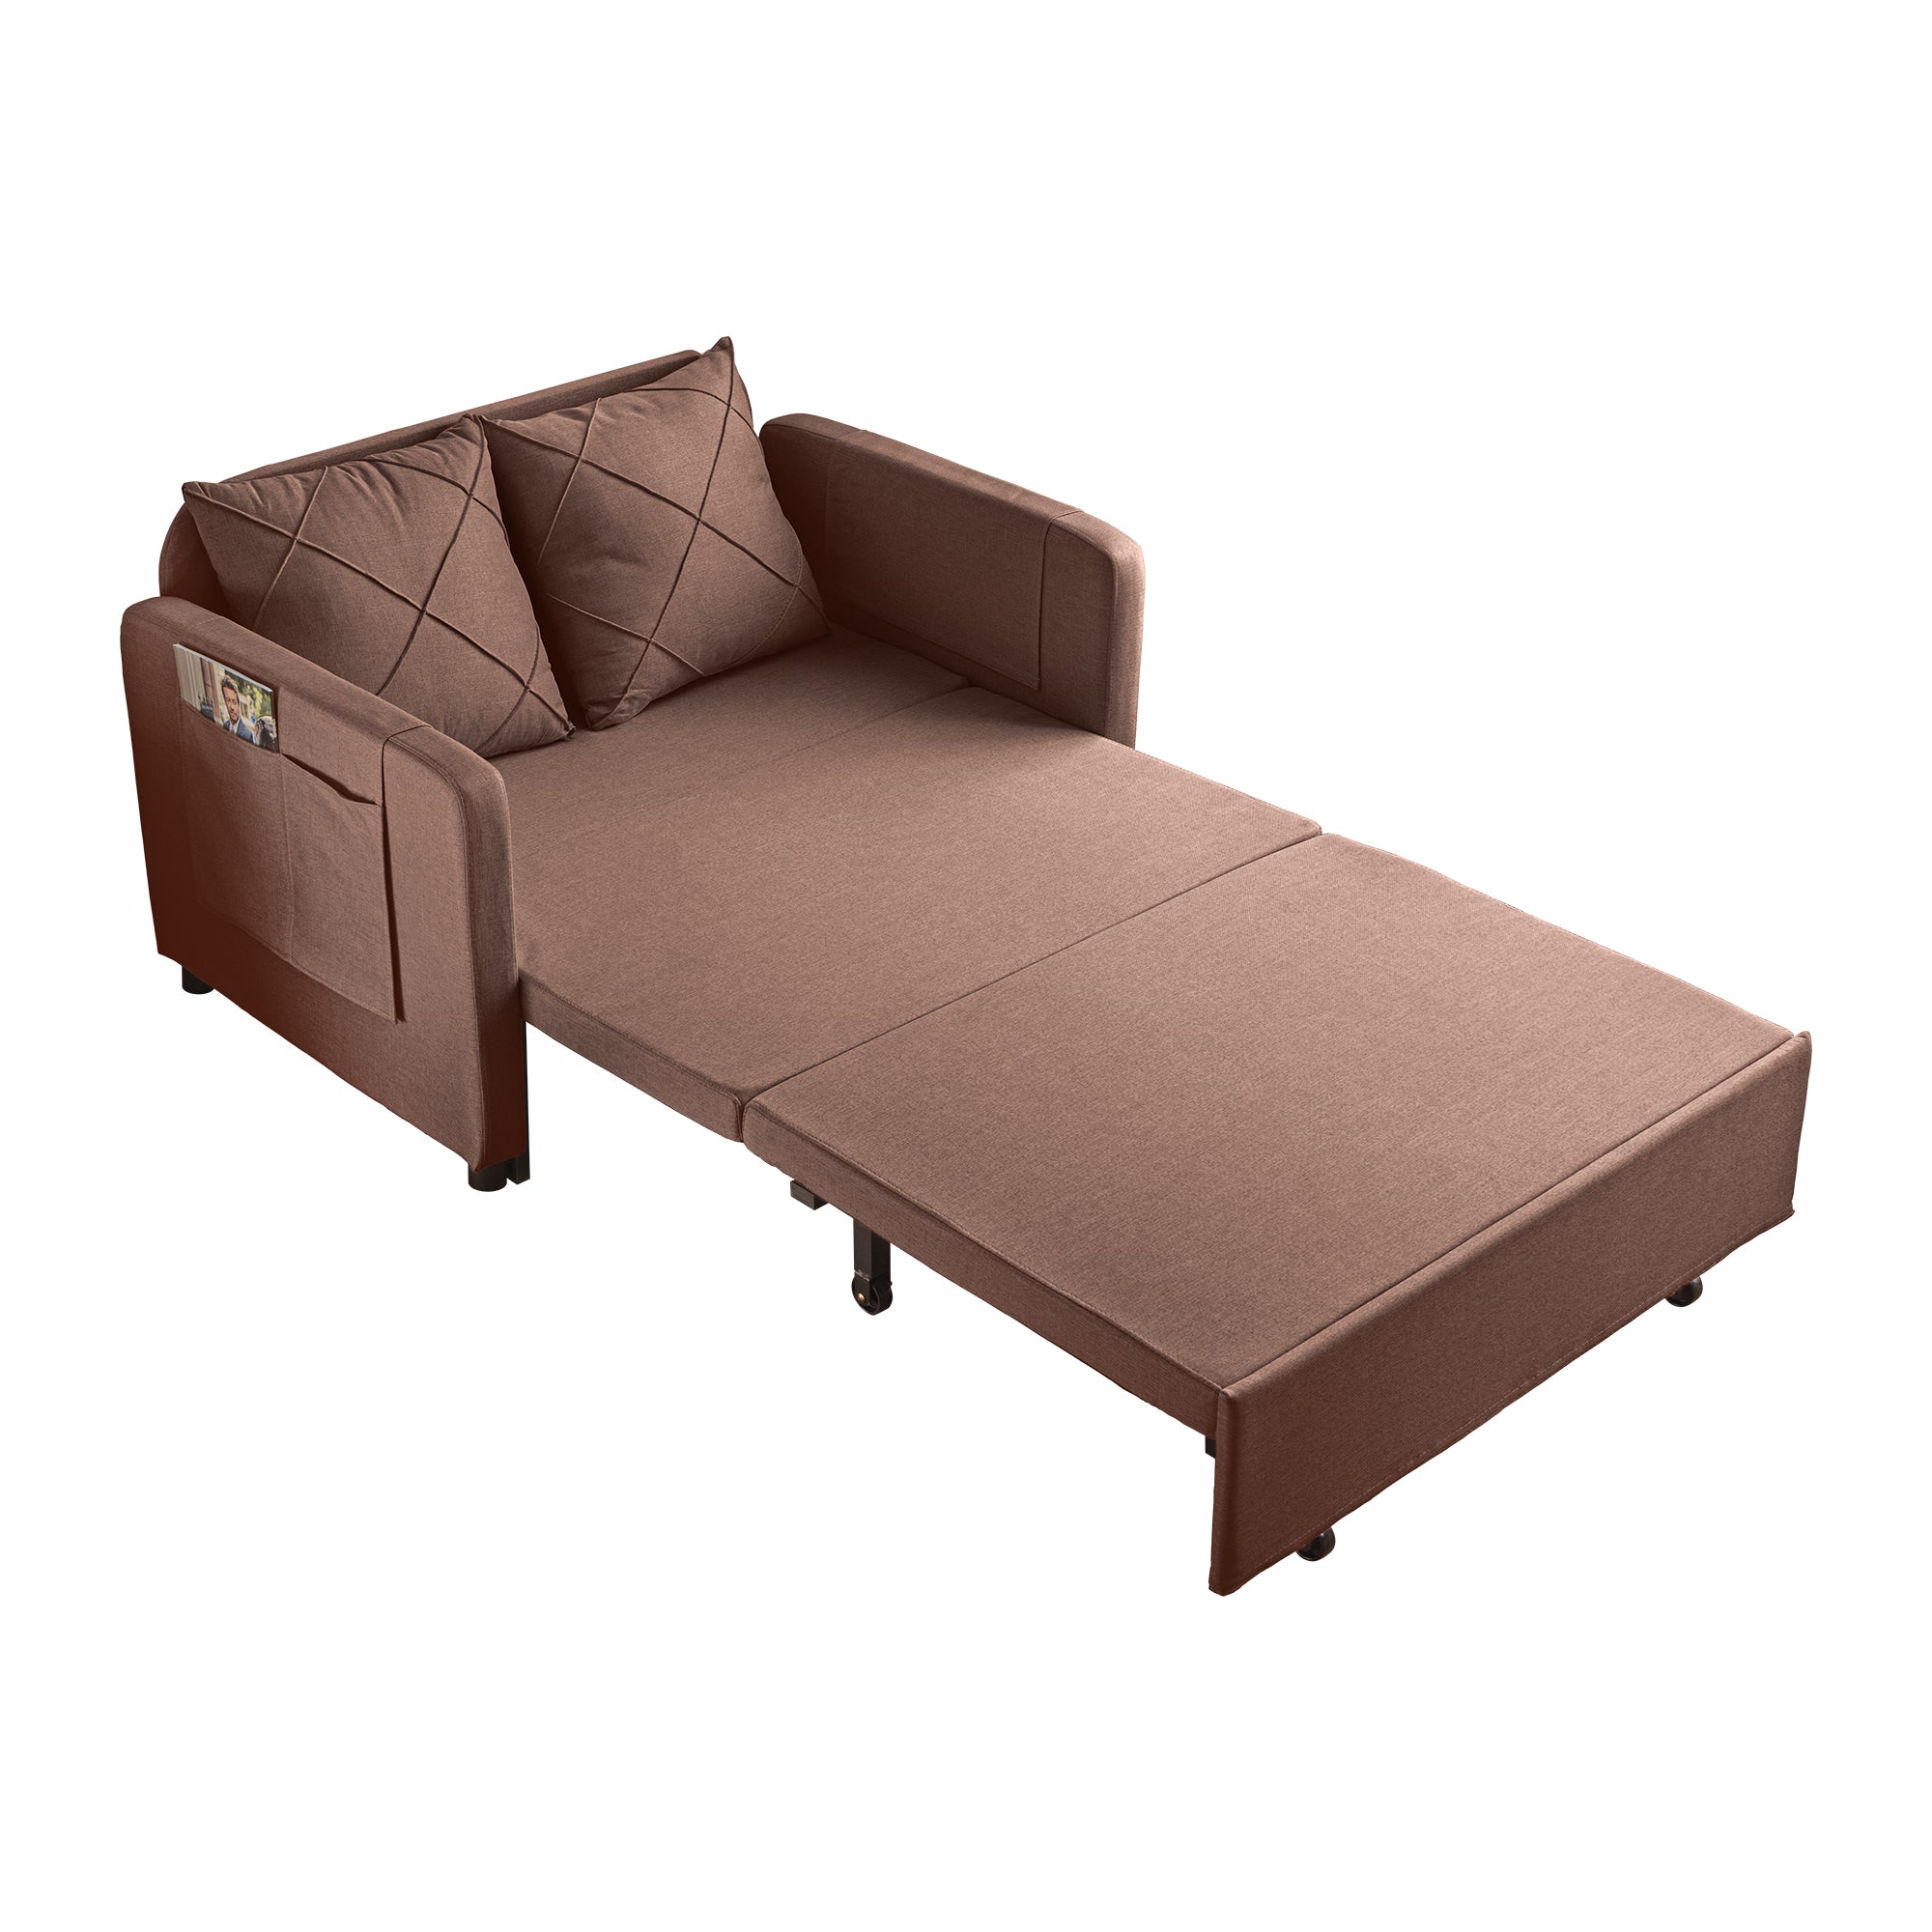 VIDEO provided Modern Love Seat Futon Sofa Bed with brown-foam